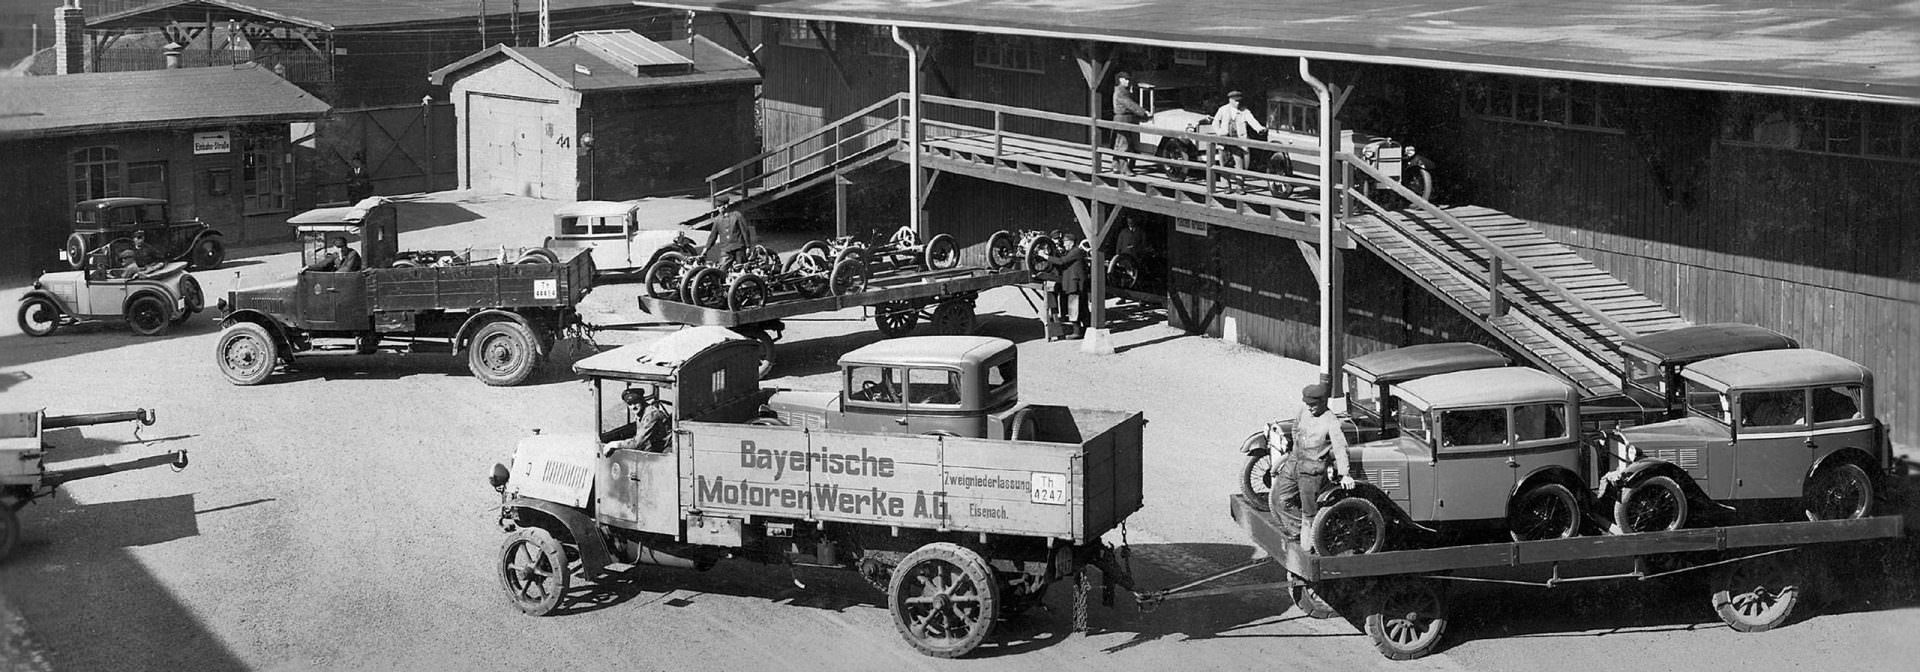 Vintage photograph of the Fahrzeugfabrik Eisenach factory in Germany, showing various early BMW Dixi cars and trucks on display or being loaded onto a ramp.